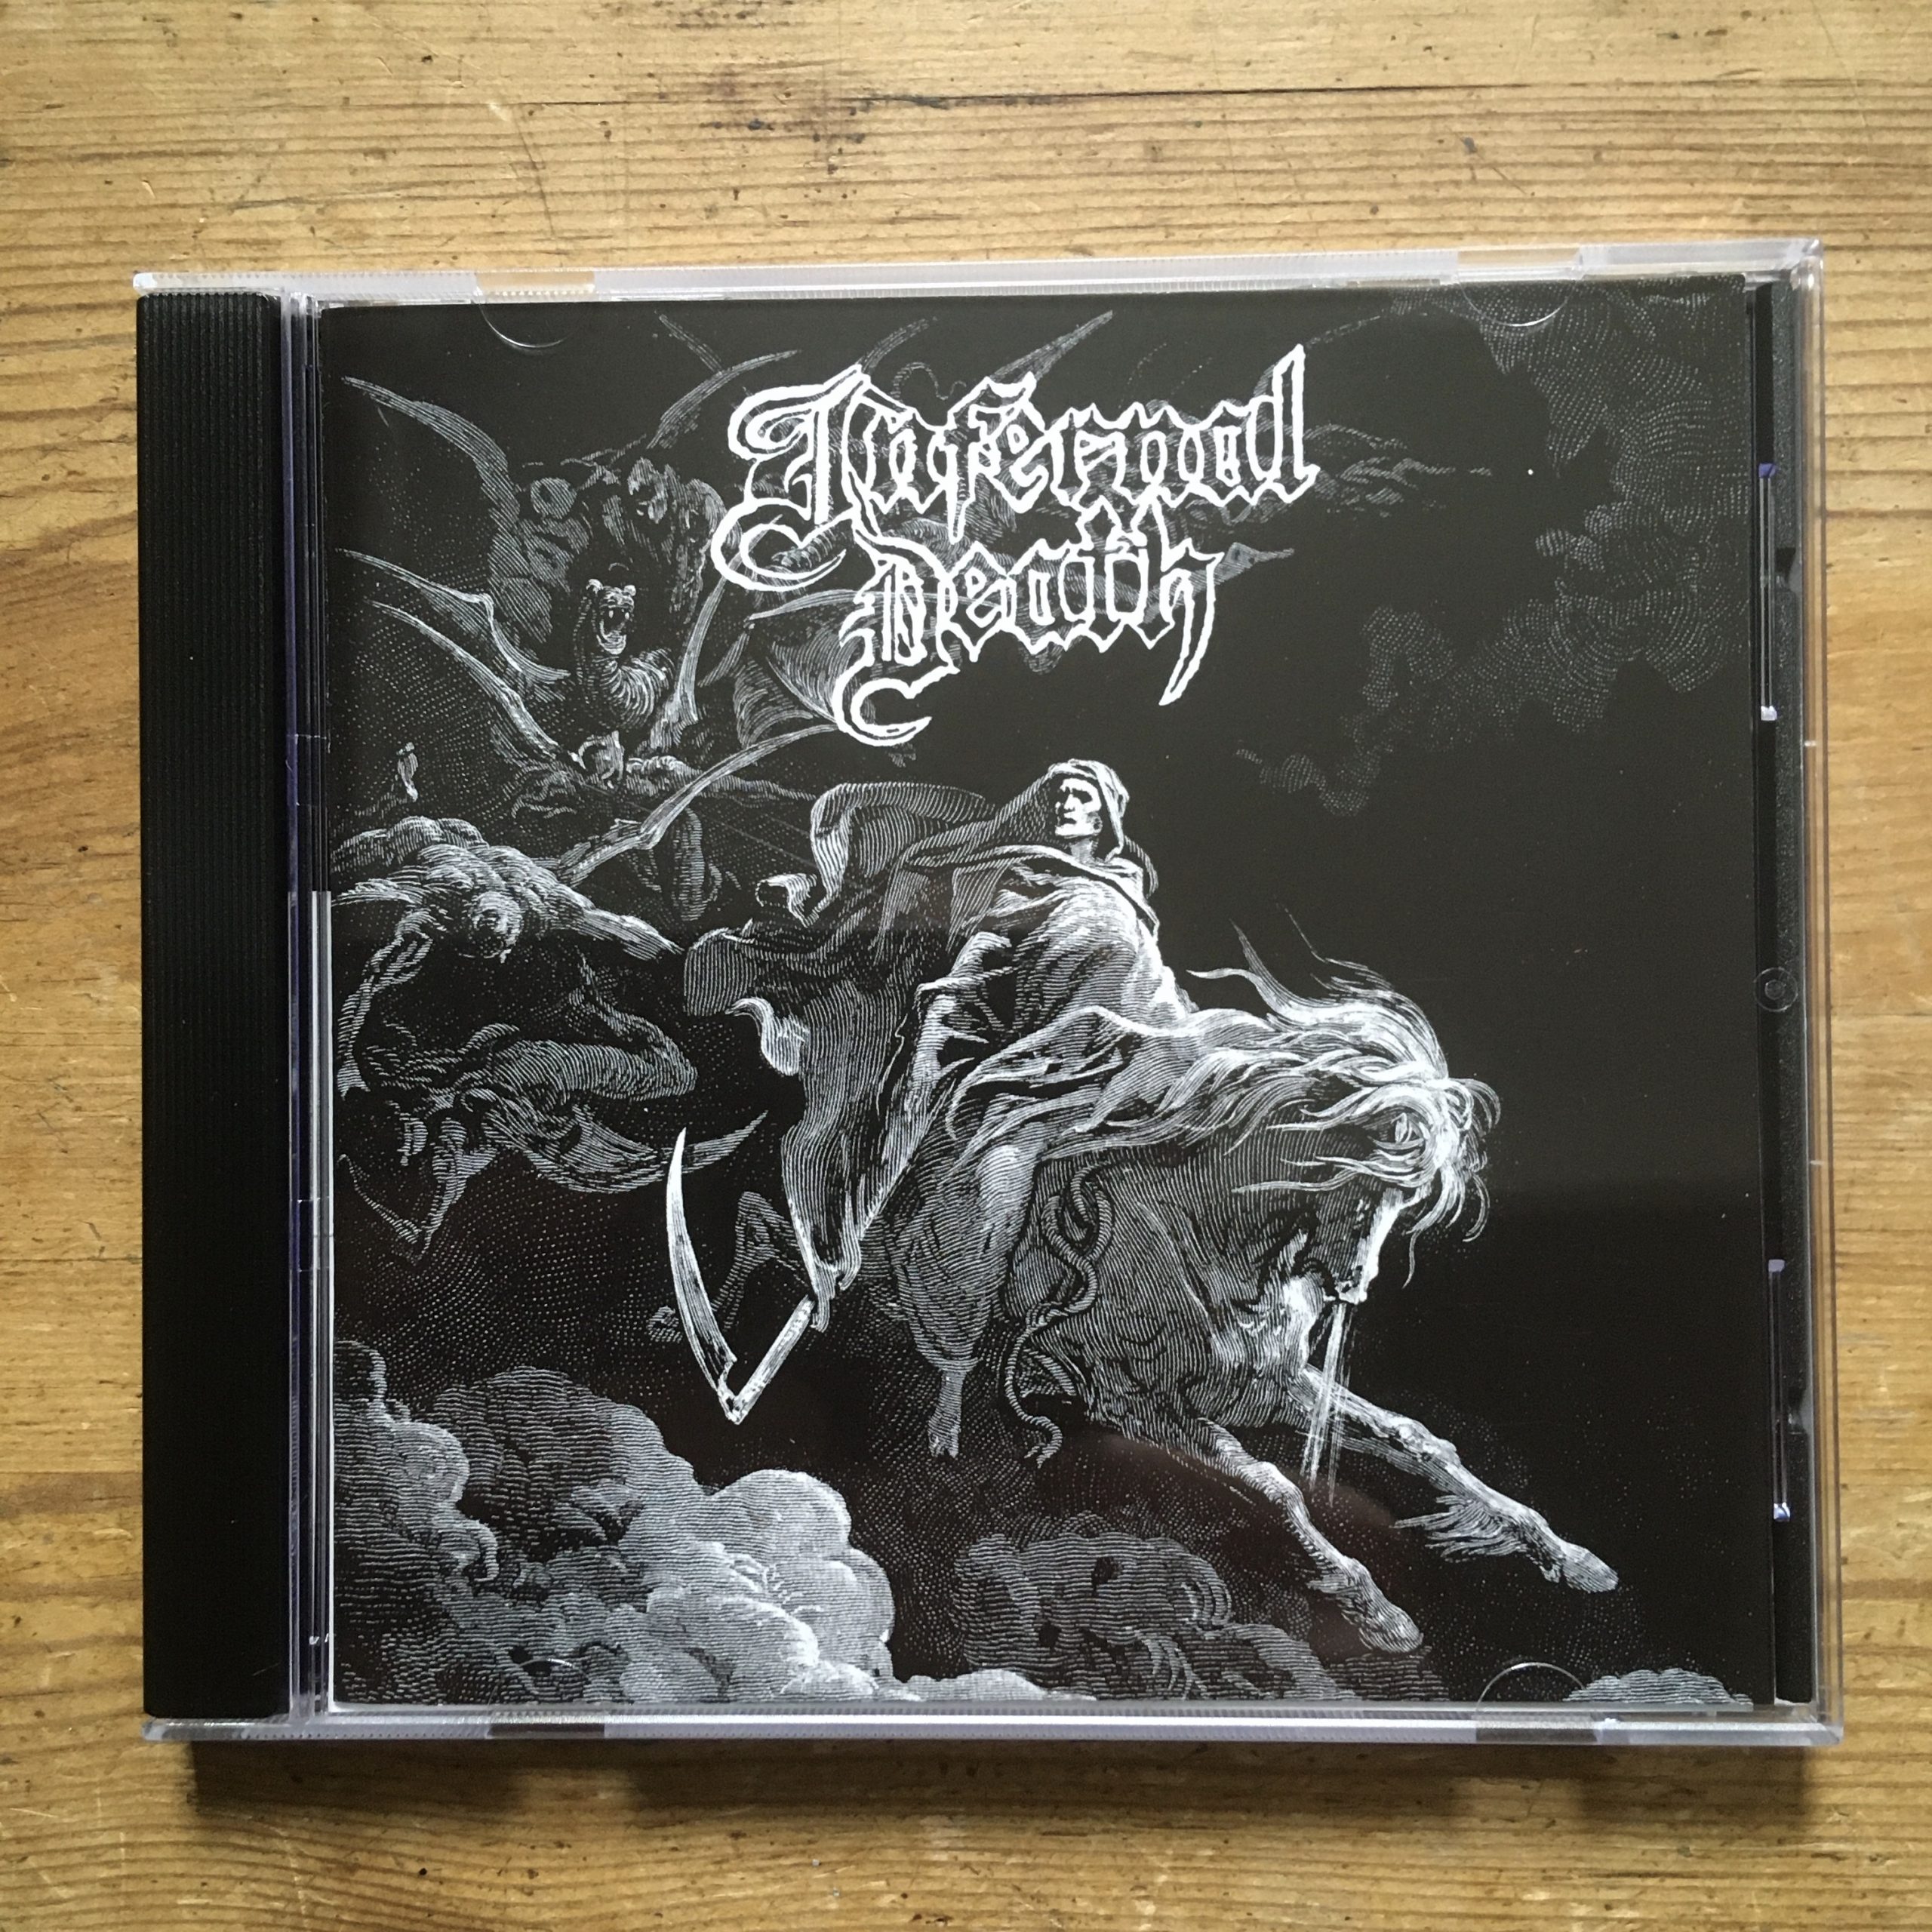 Photo of the Infernal Death - "Demo #1 / A Mirror Blackened" CD